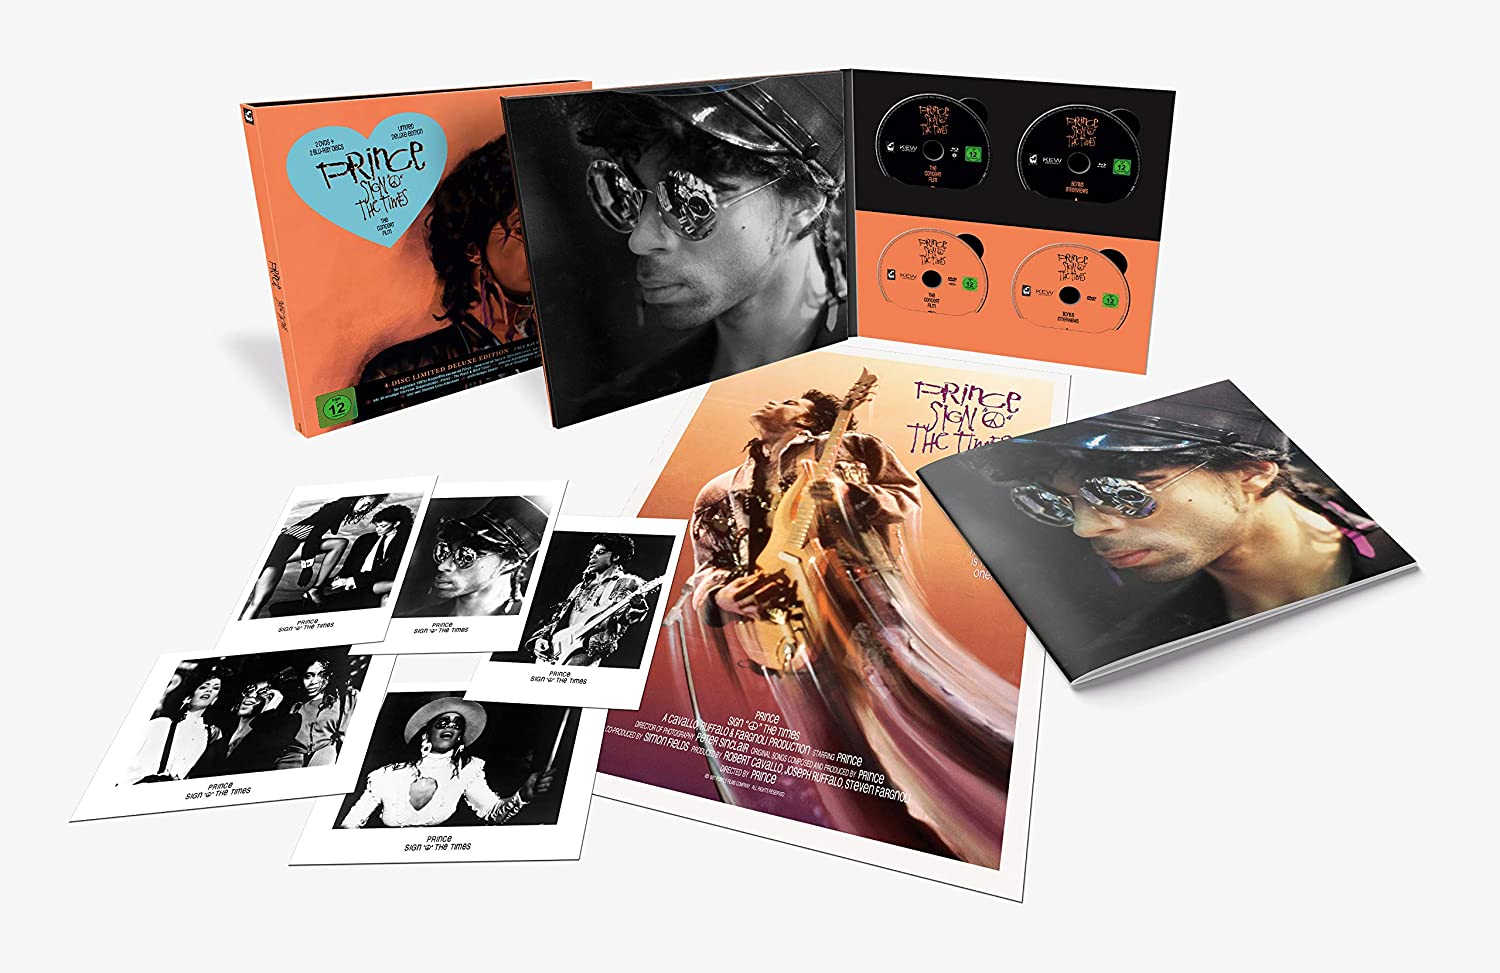 Prince Sign 'O' the Times (Limited Deluxe Edition) (2 Blu-ray Discs + 2 DVDs)